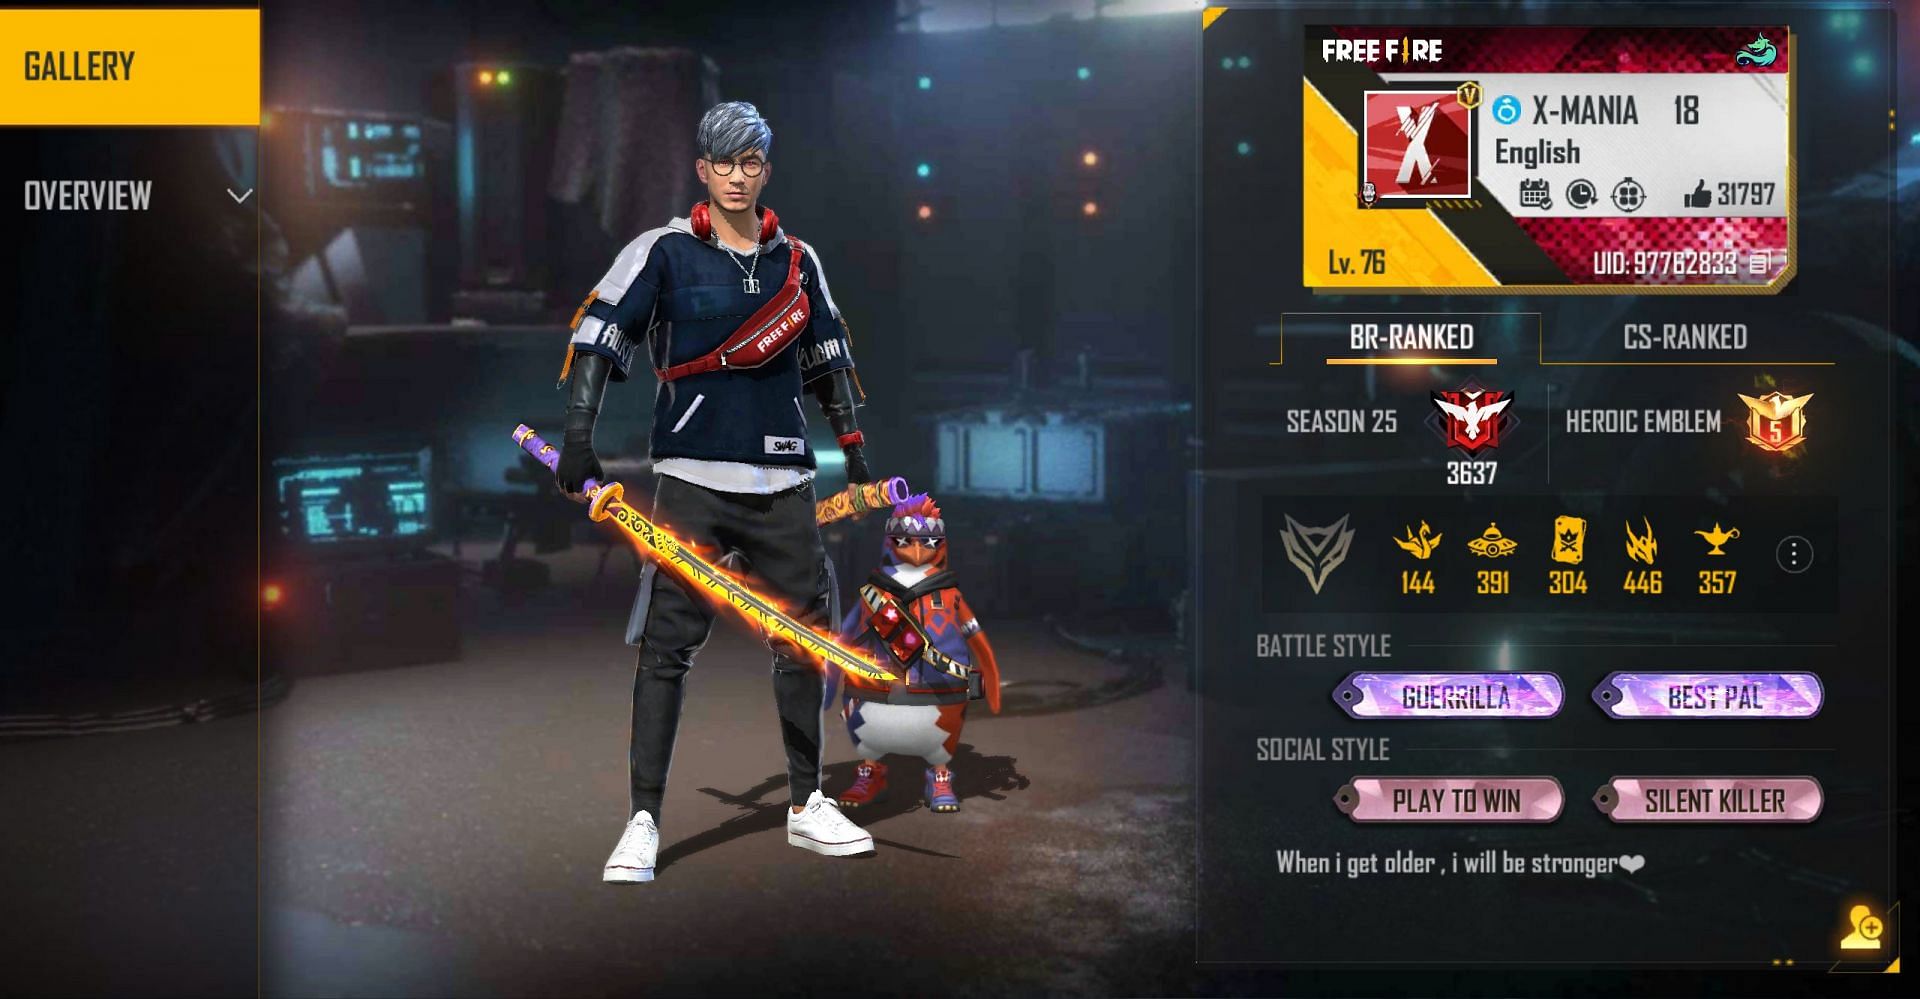 X-Mania&#039;s ID in the game (Image via Garena)